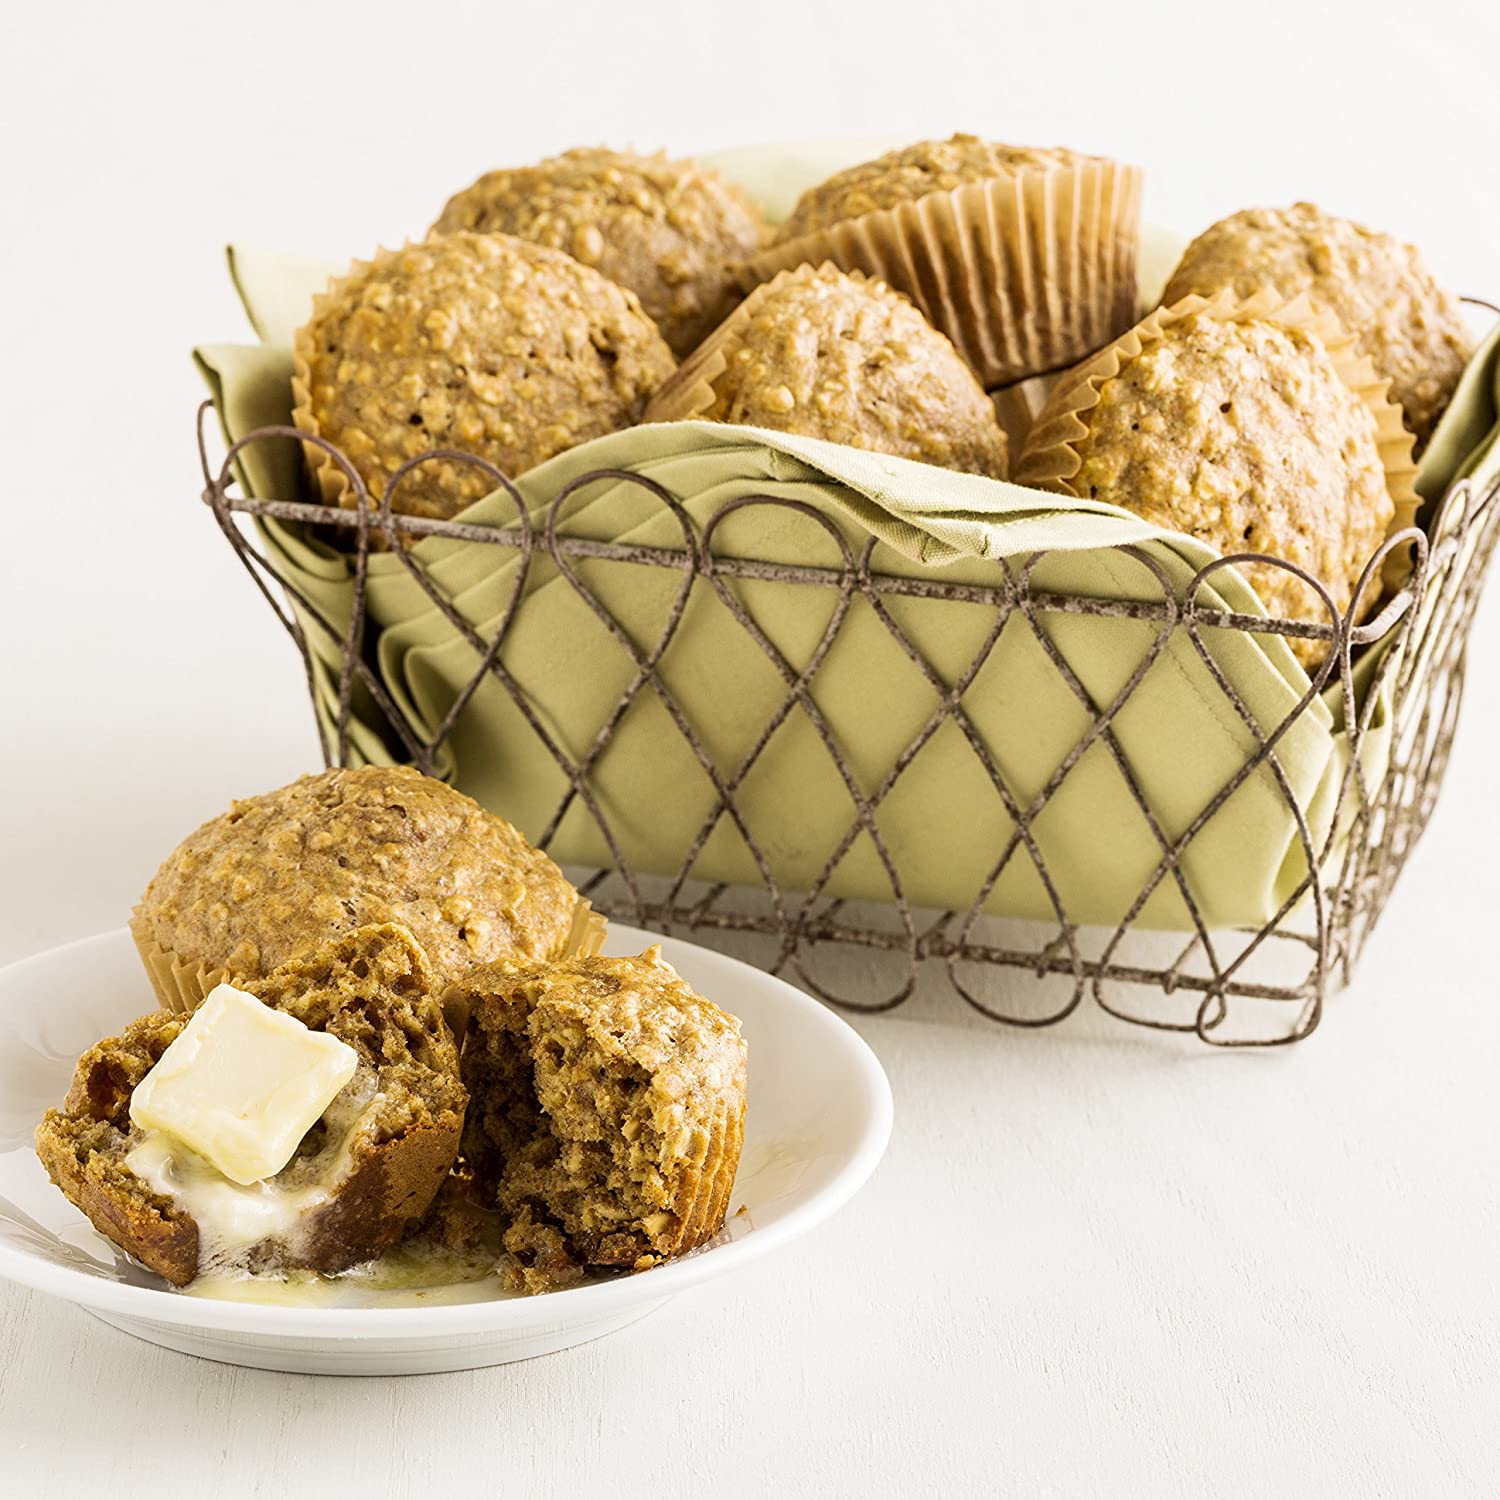 Oatmeal muffins in a basket with Augason Farms Quick Oats.